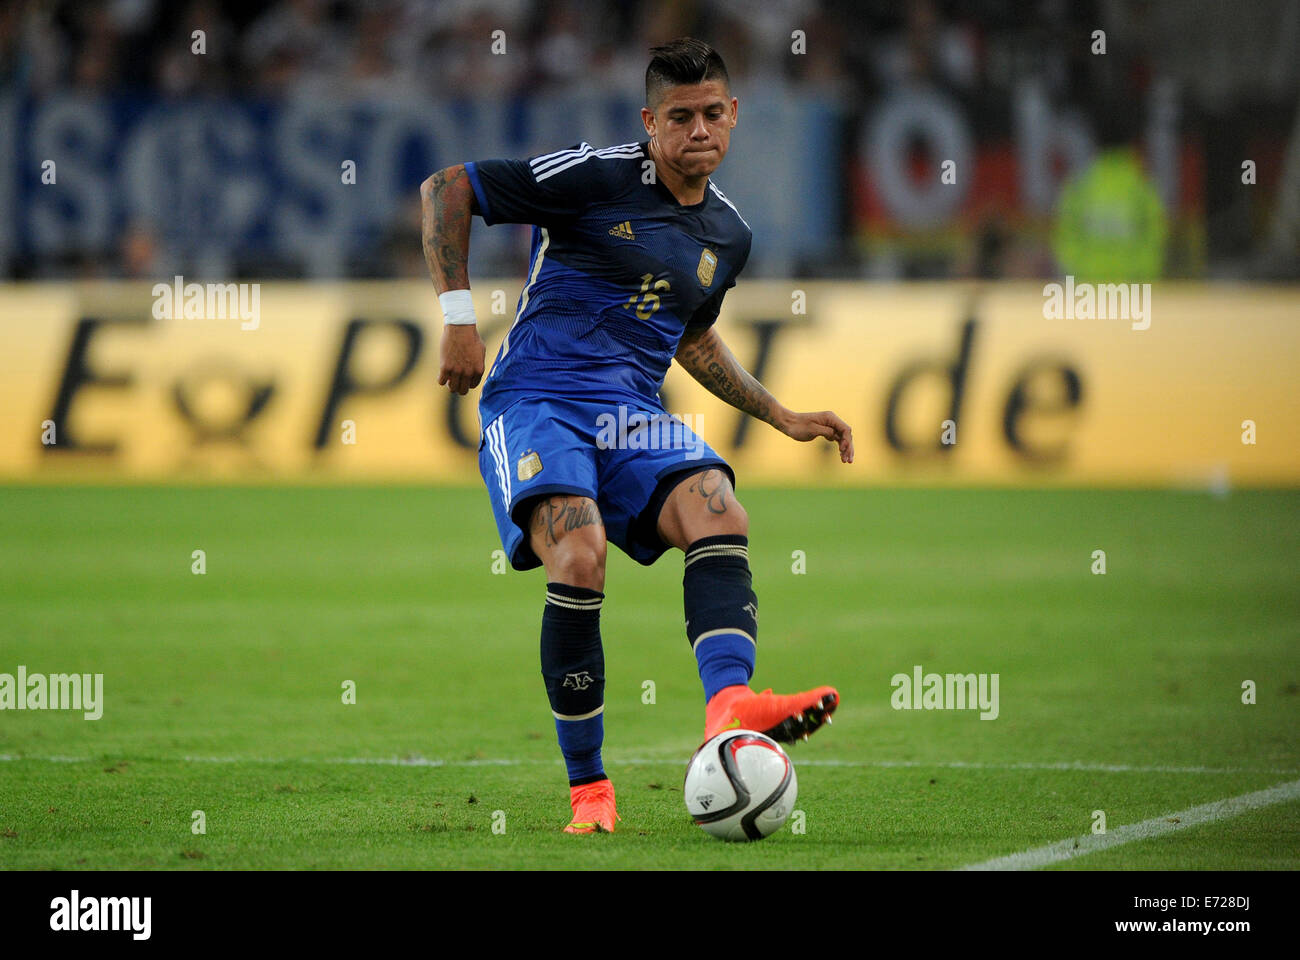 Duesseldorf, Germany. 03rd Sep, 2014. Argentina's Marcos Rojo controls the ball during the international match between Germany vs Argentina at Esprit arena in Duesseldorf, Germany, 03 September 2014. Photo: Jonas Guettler/dpa/Alamy Live News Stock Photo